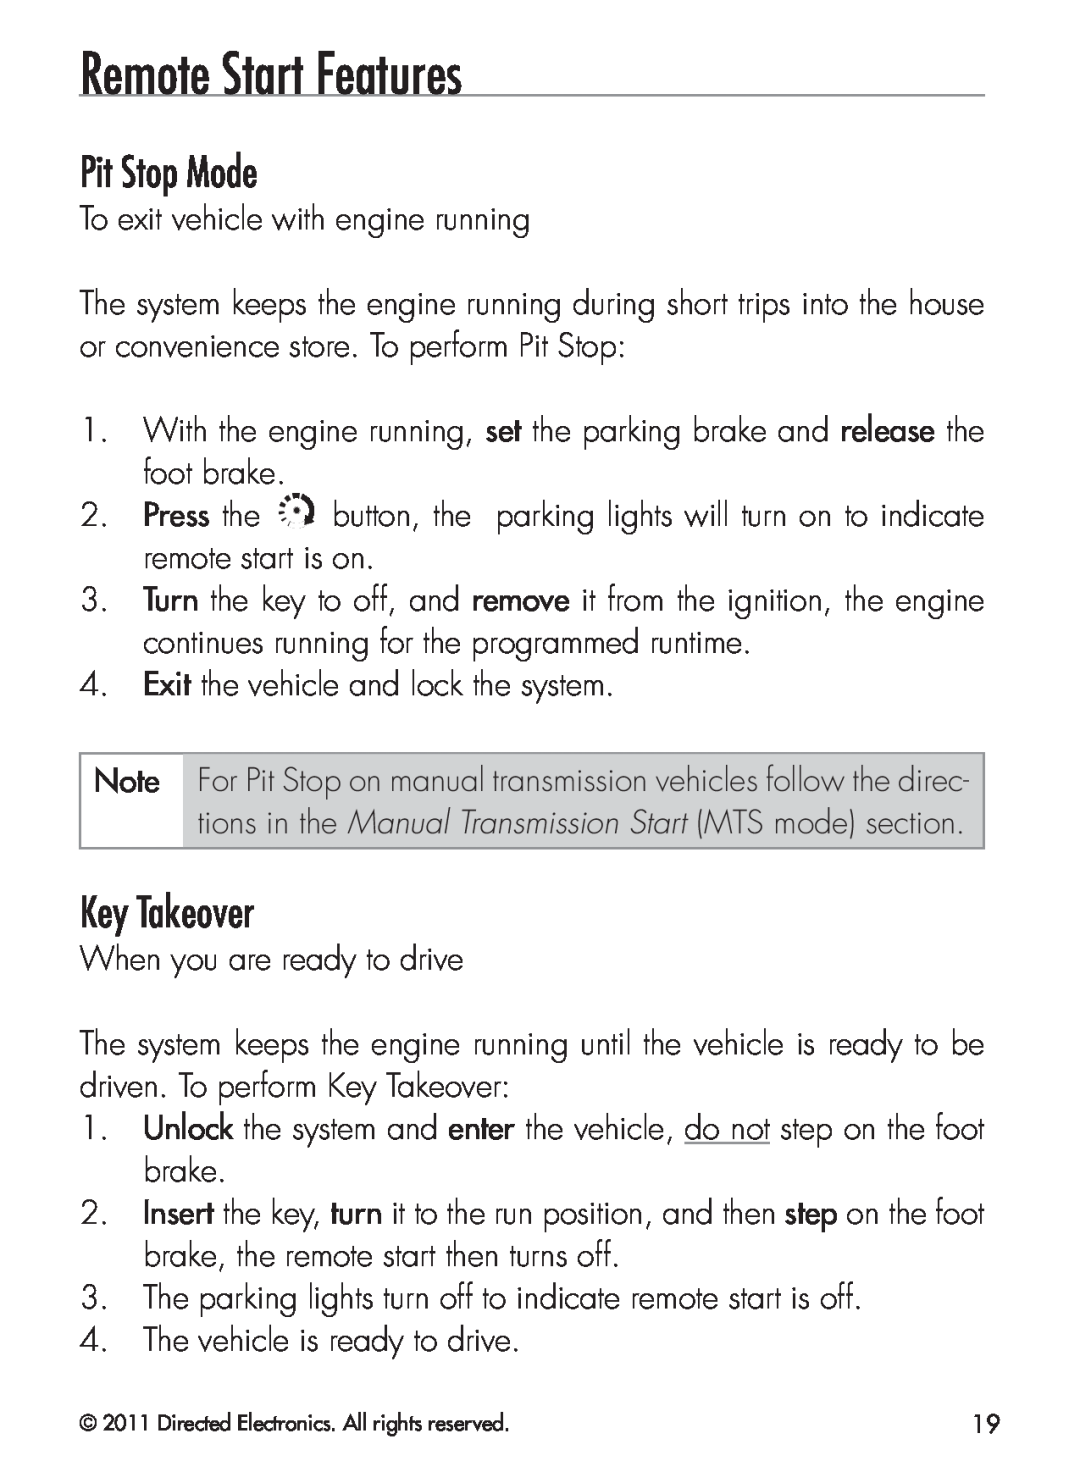 Python 424 manual Remote Start Features, Pit Stop Mode, Key Takeover 